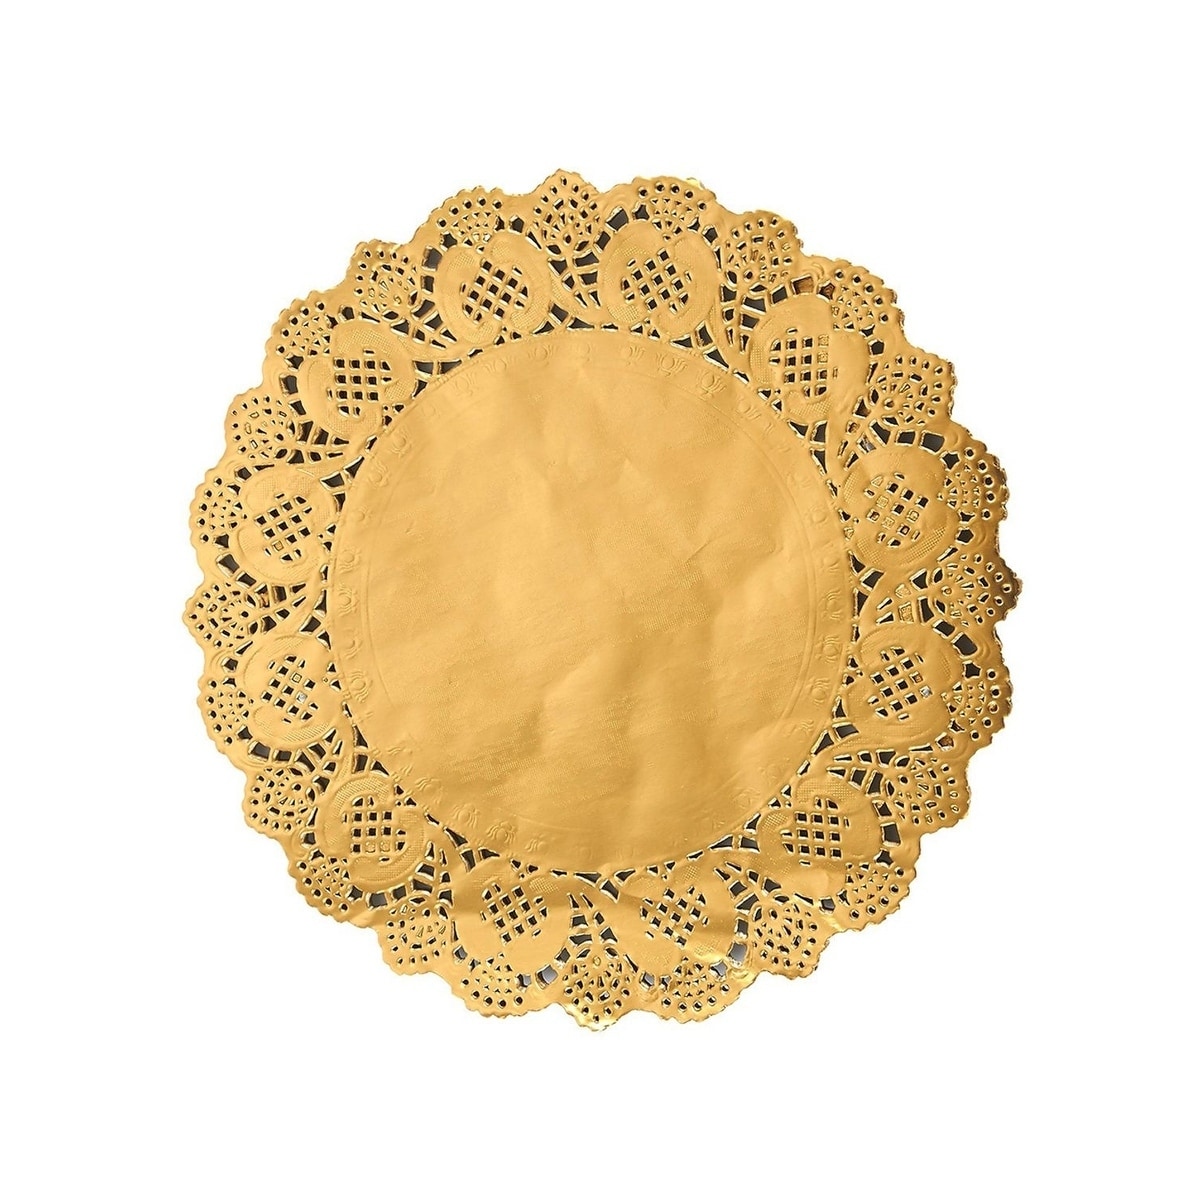  White Round Lace Paper Doilies Disposable Lace Placemats for  Food, Cakes, Desserts, and Baked Treats(6 inch, Pack of 100) : Home &  Kitchen